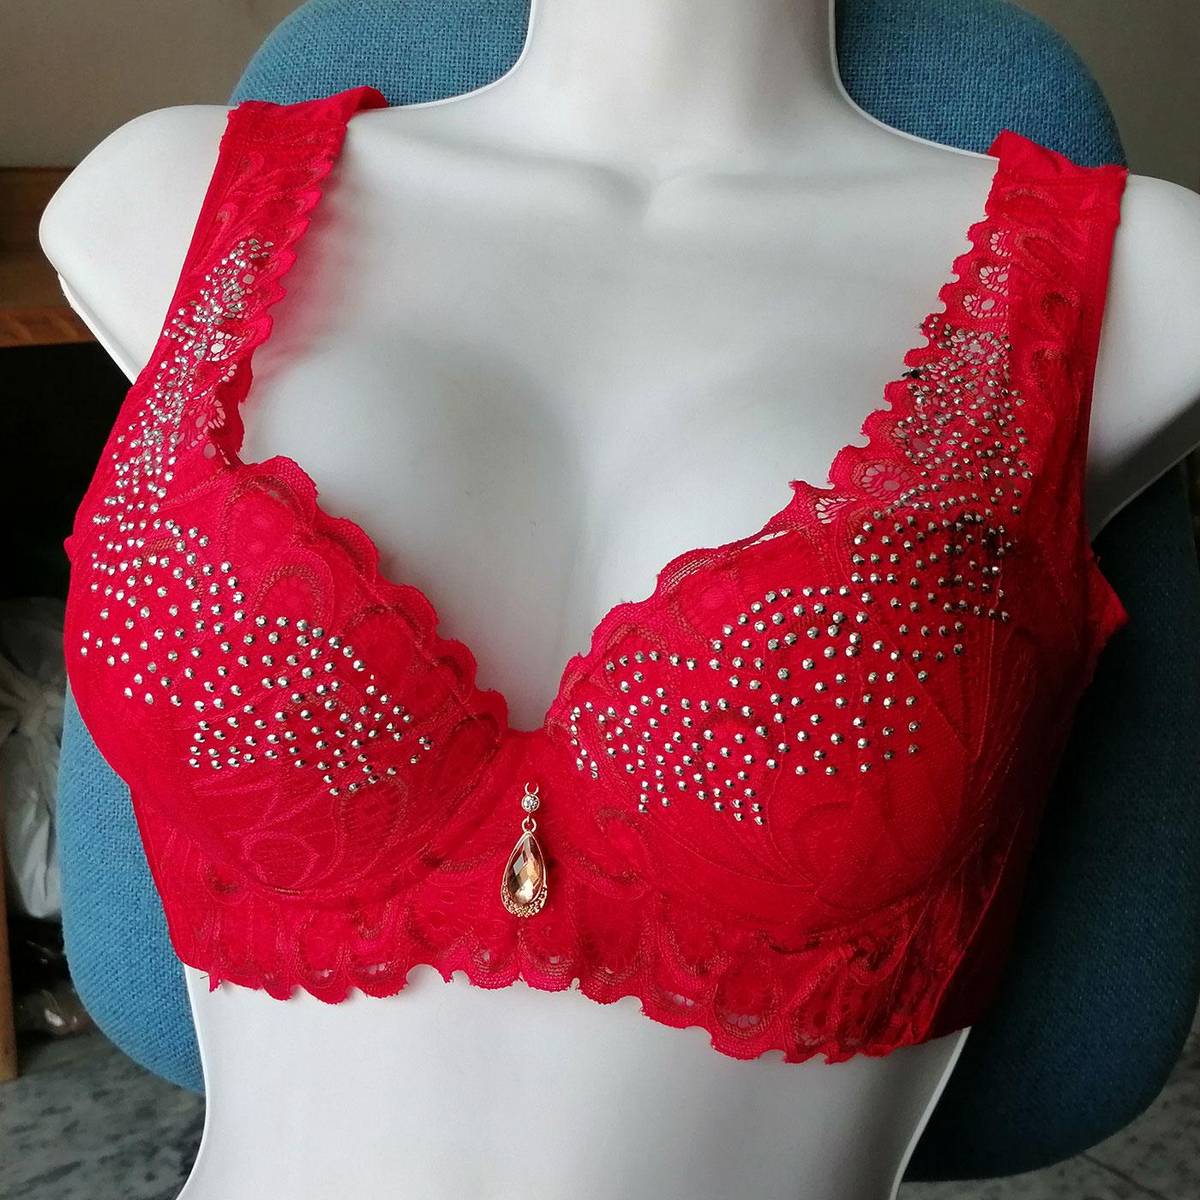 Double Padded Bra High Quality  Online Shopping In Pakistan